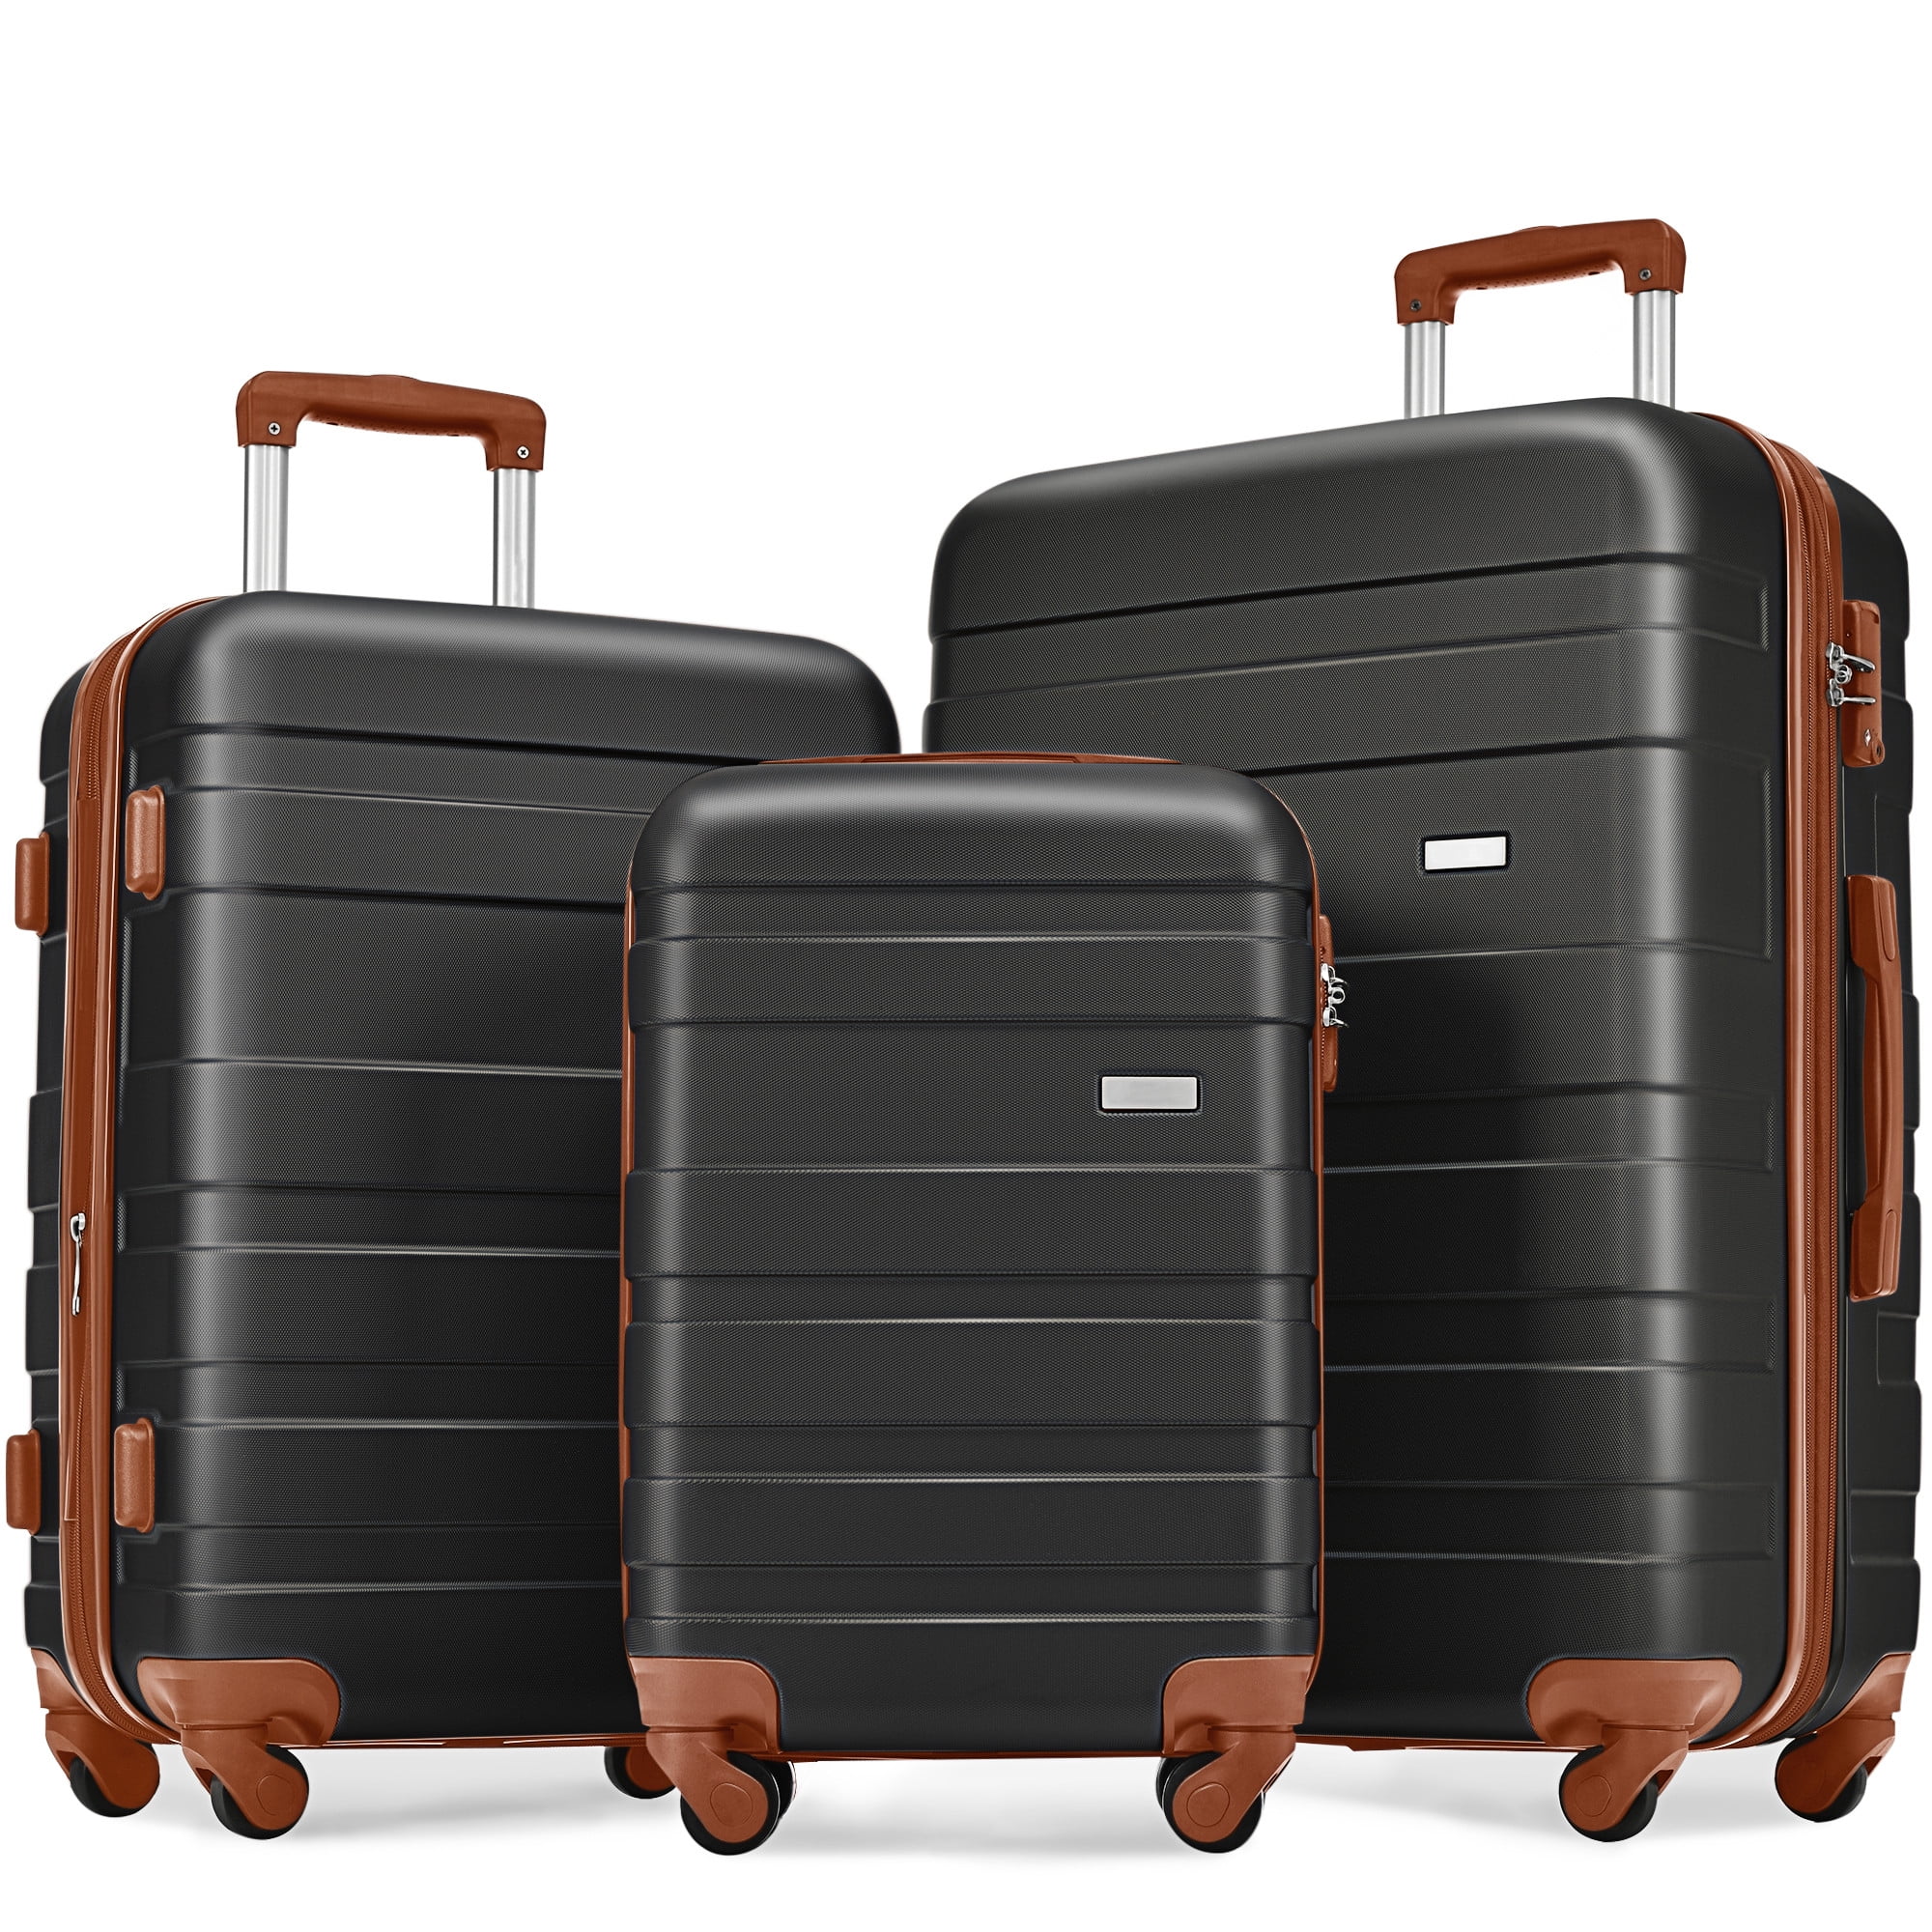 3 Piece Sets Expandable Hard Set with Wheels 20 24 28 inch Lightweight Suitcase with TSA Lock - Walmart.com